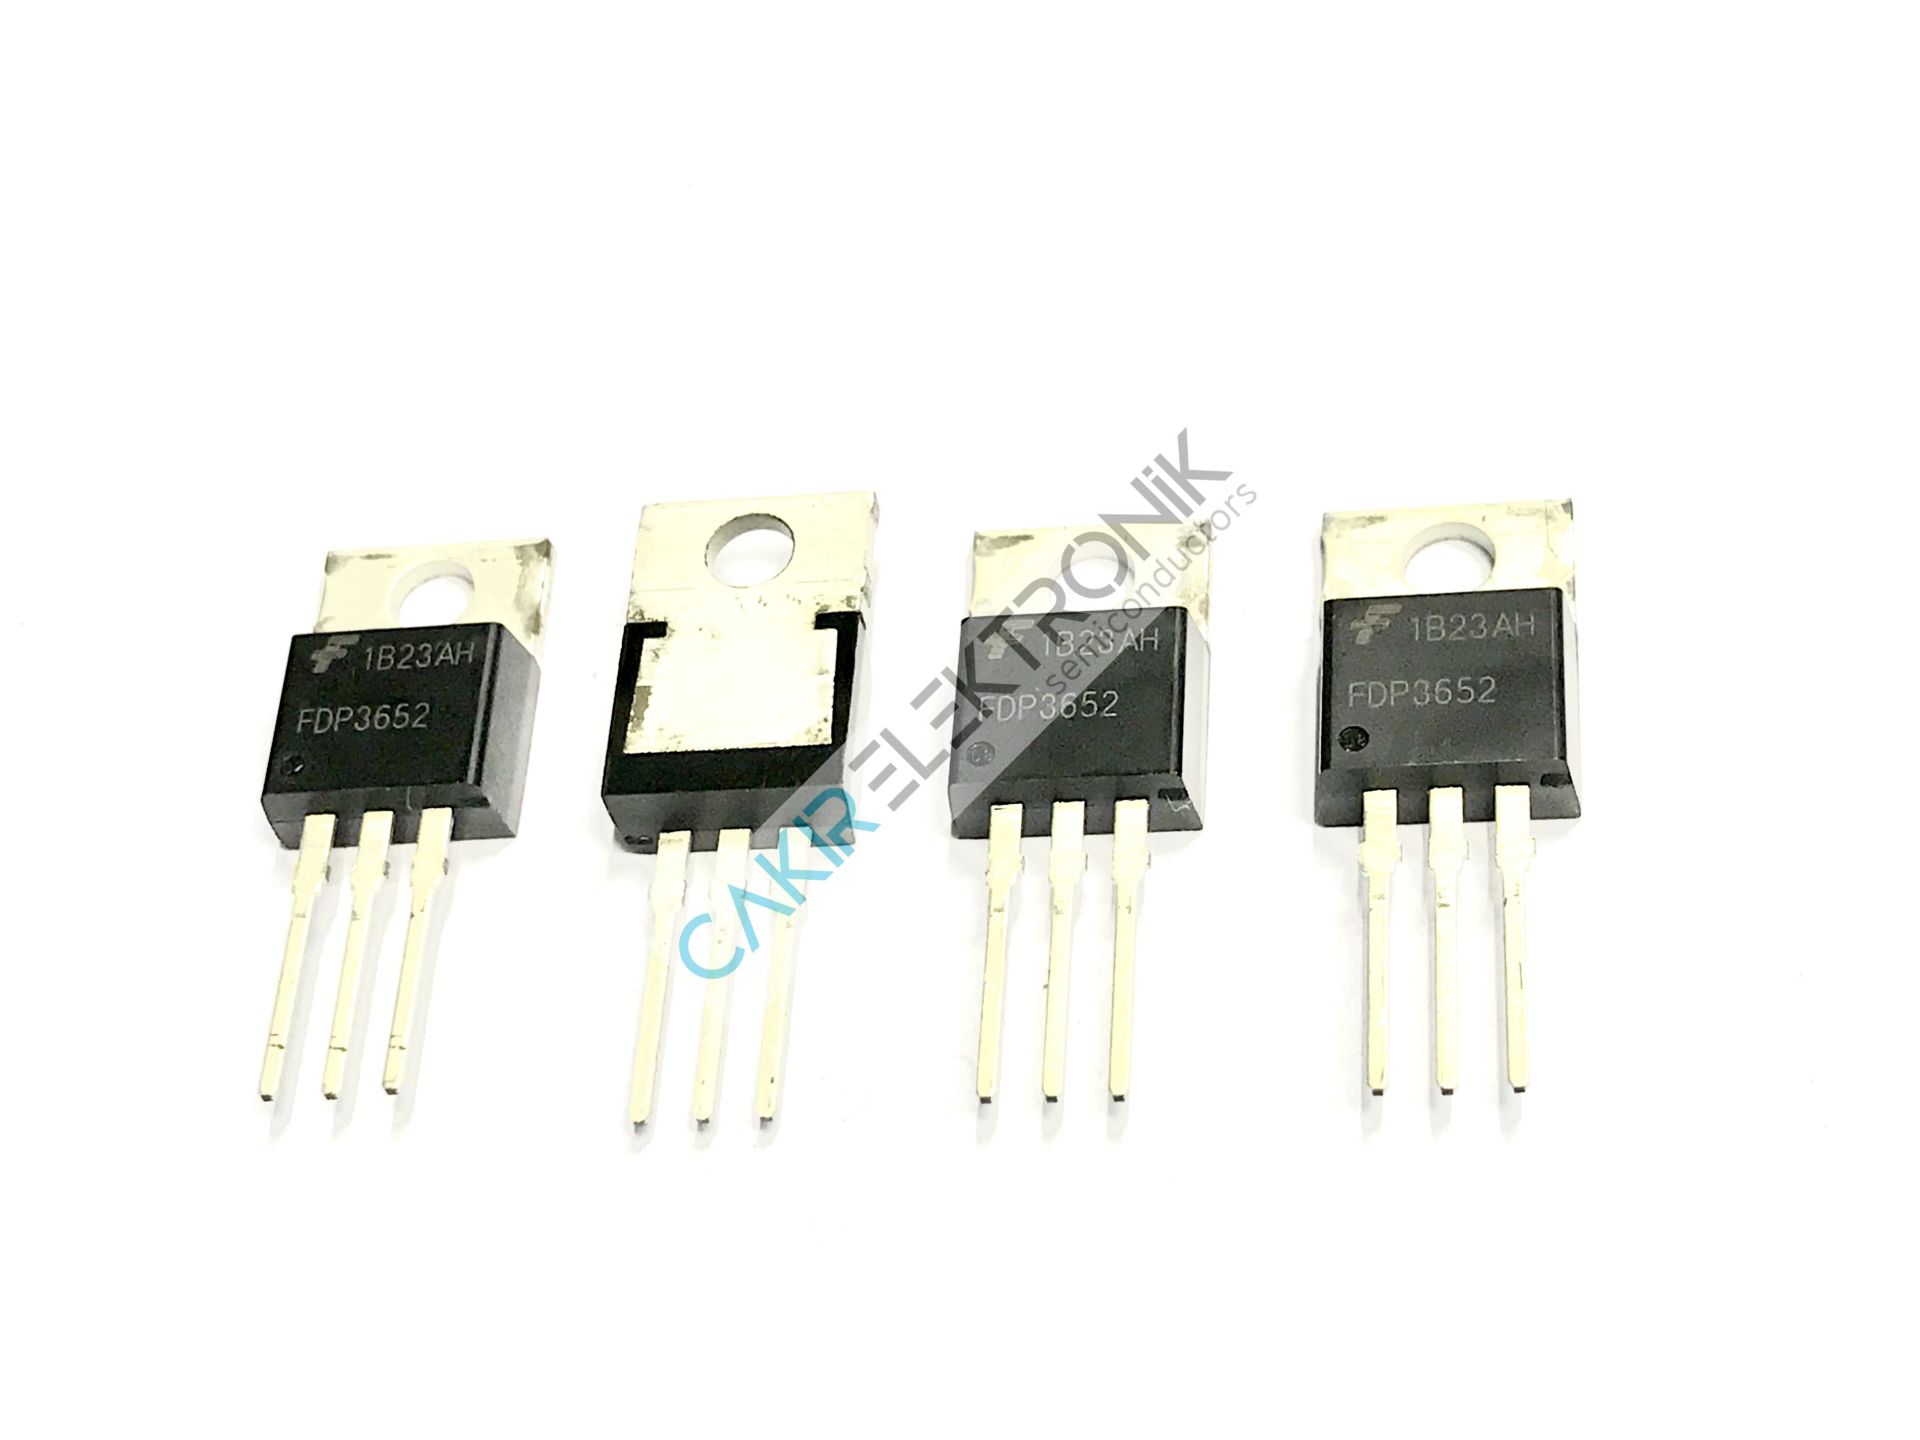 FDP3652 - 3652 - FDB3652 / FDP3652 / FDI3652N-Channel PowerTrench® MOSFET100V, 61A, 16mΩFeatures•rDS(ON) = 14mΩ (Typ.), VGS = 10V, ID = 61A •Qg(tot) = 41nC (Typ.), VGS = 10V•   Low Miller Charge•Low QRR Body Diode•   UIS Capability